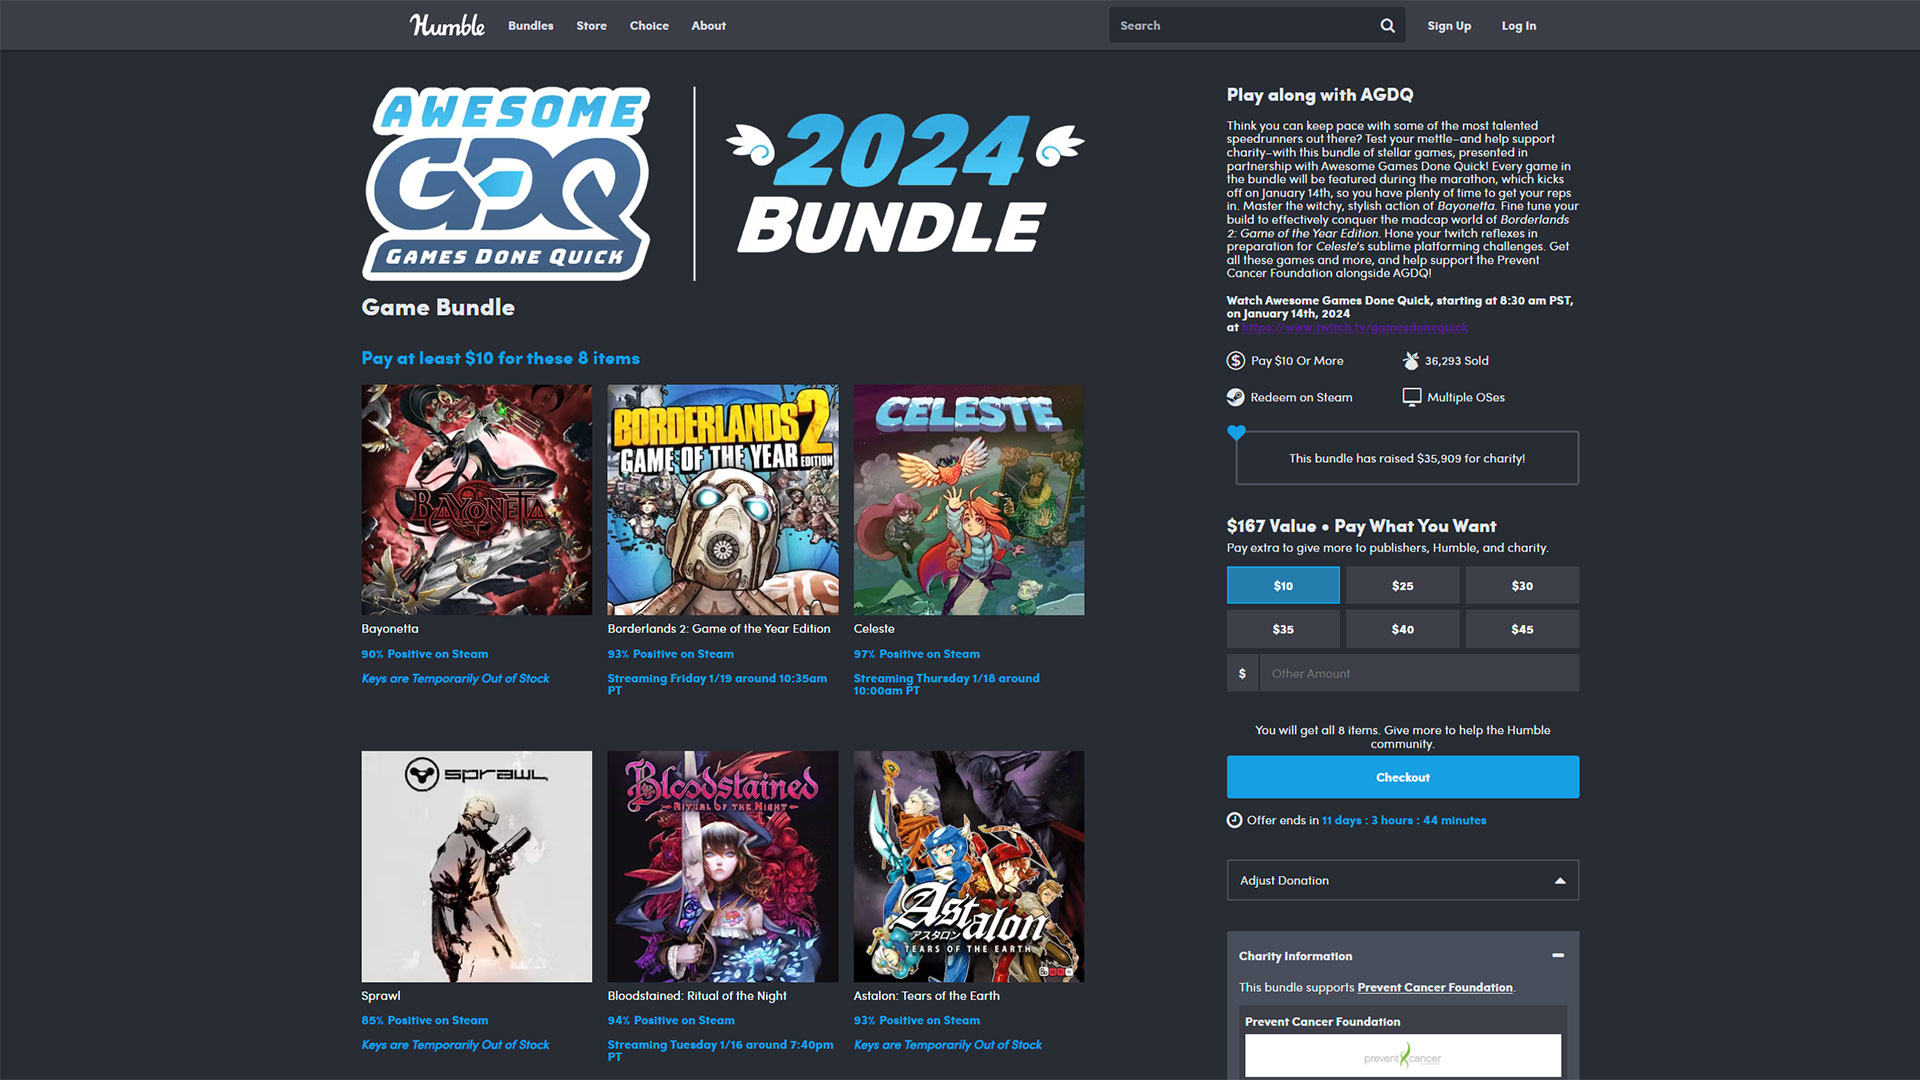 The Awesome Games Done Quick 2024 Bundle offers eight items for just $10